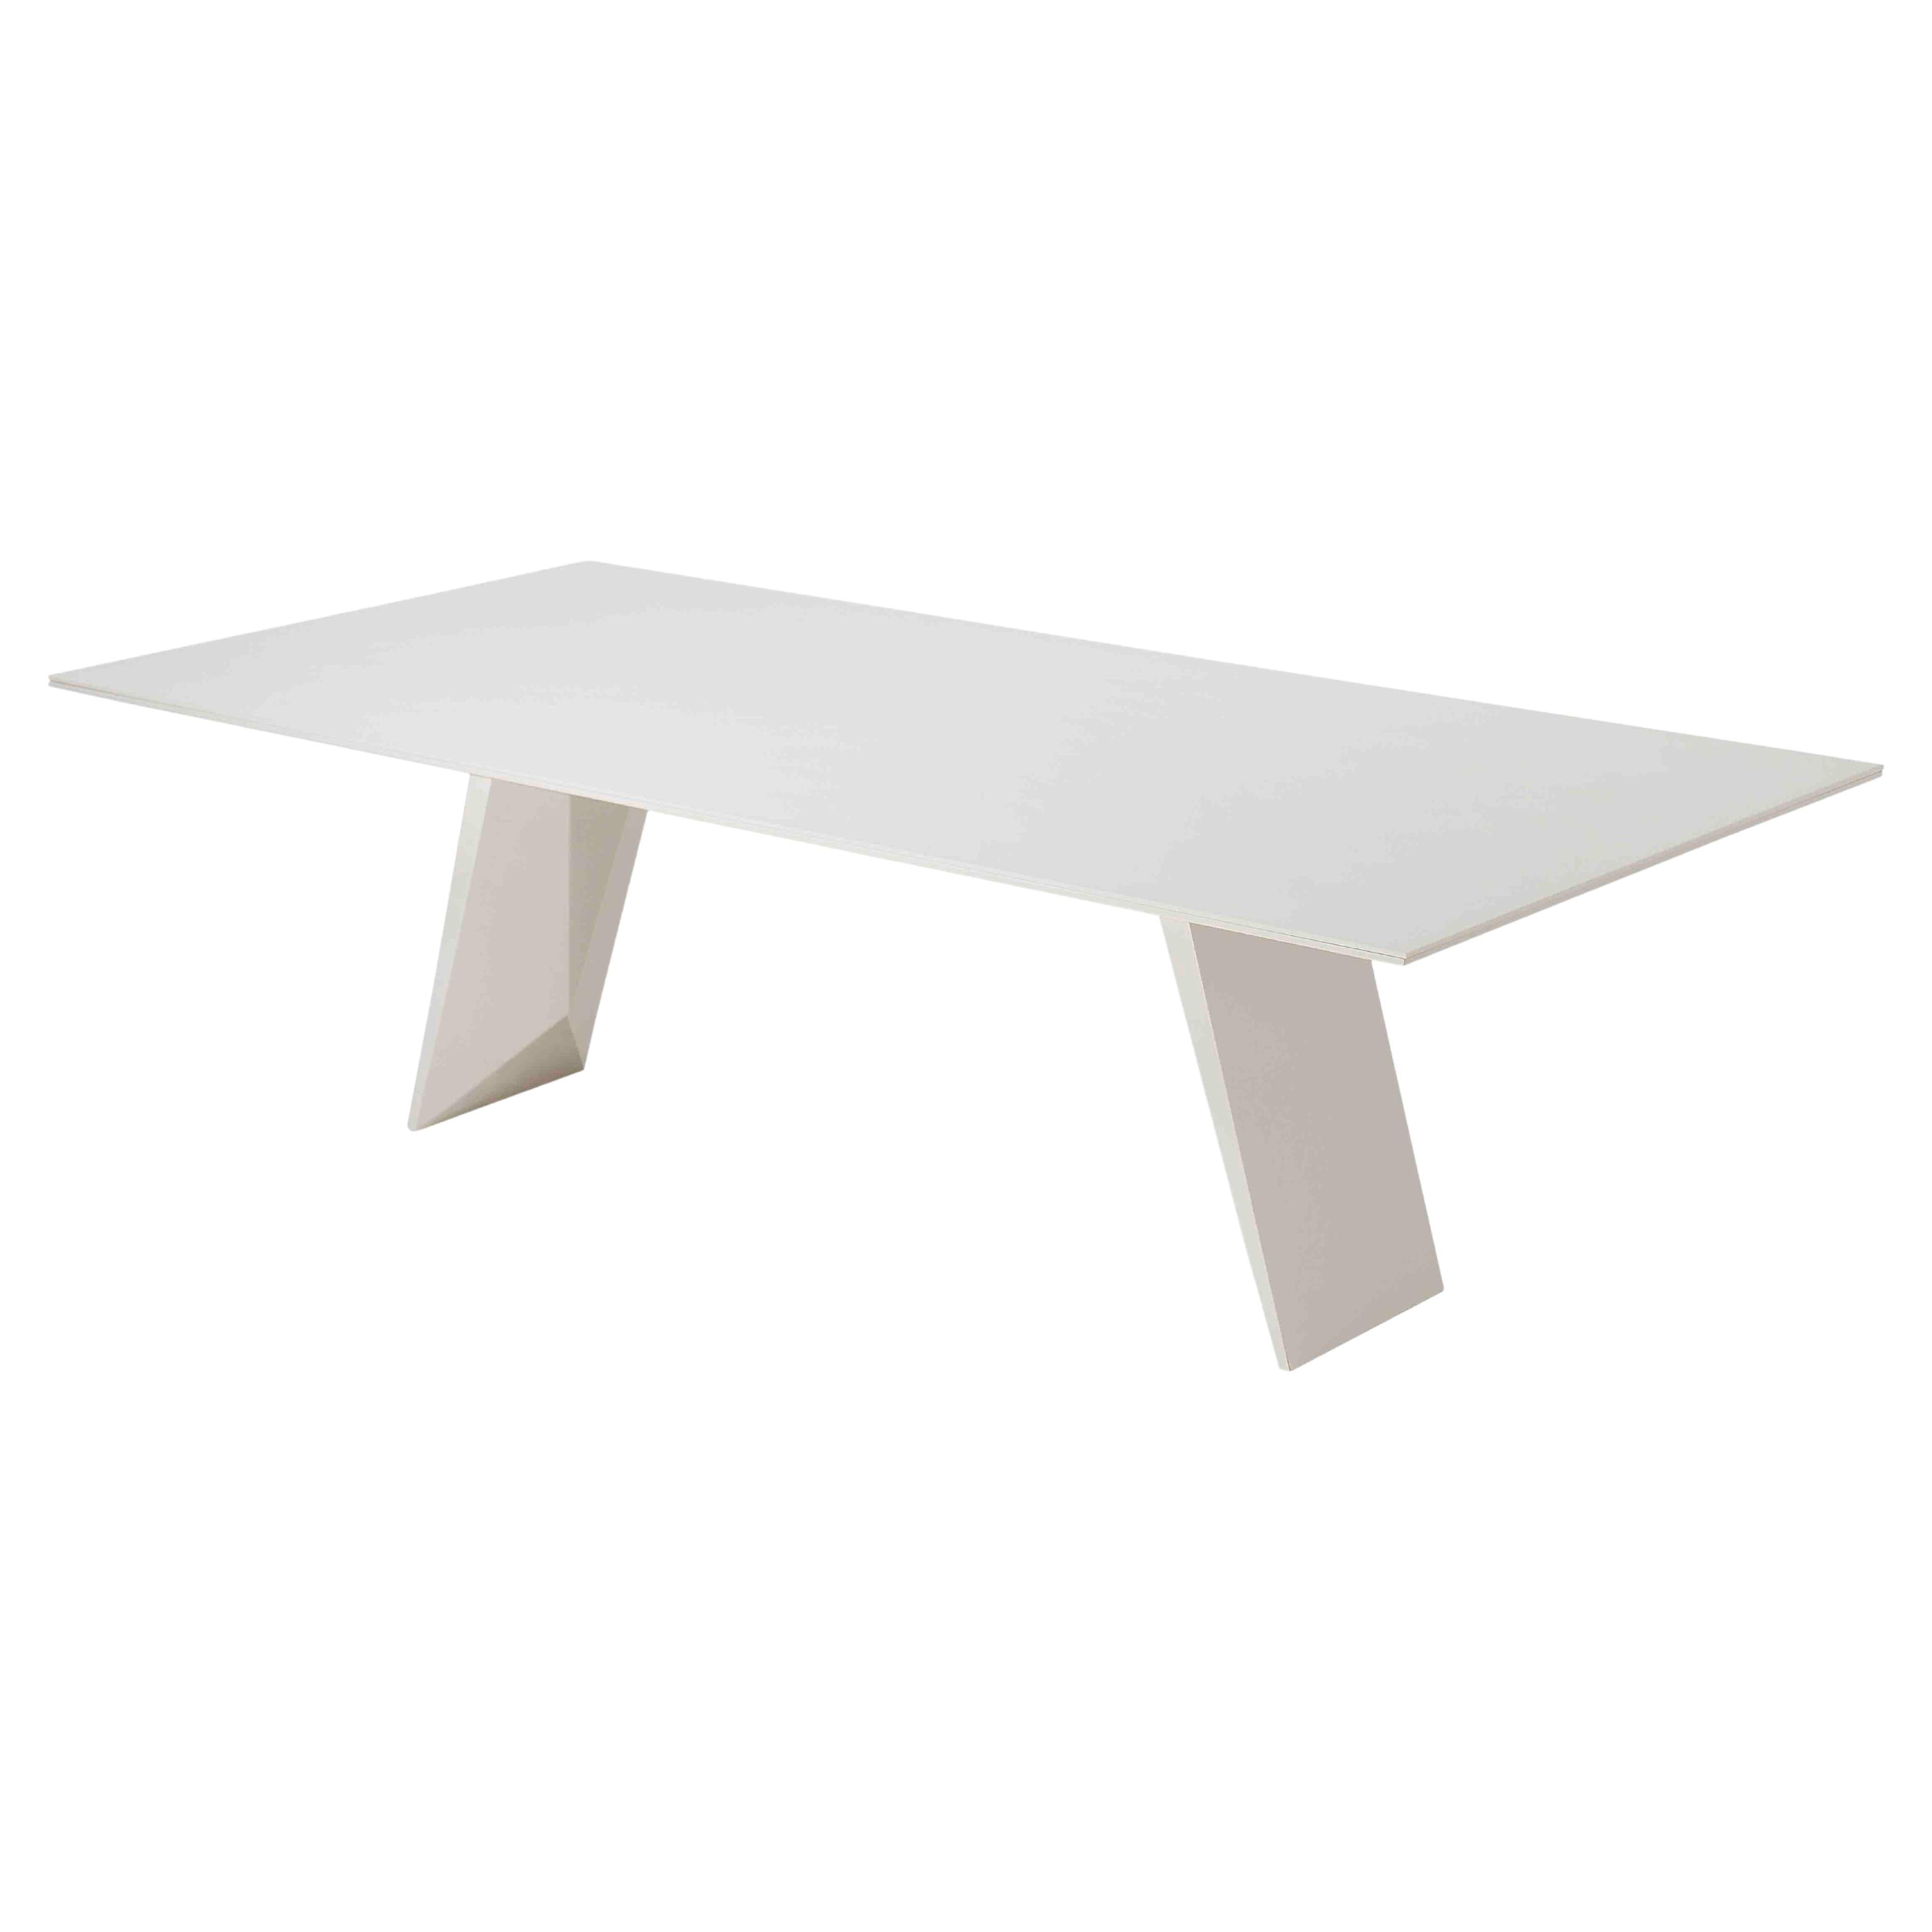 White Lacquer Atrium Rectangular Dining Table For Sale